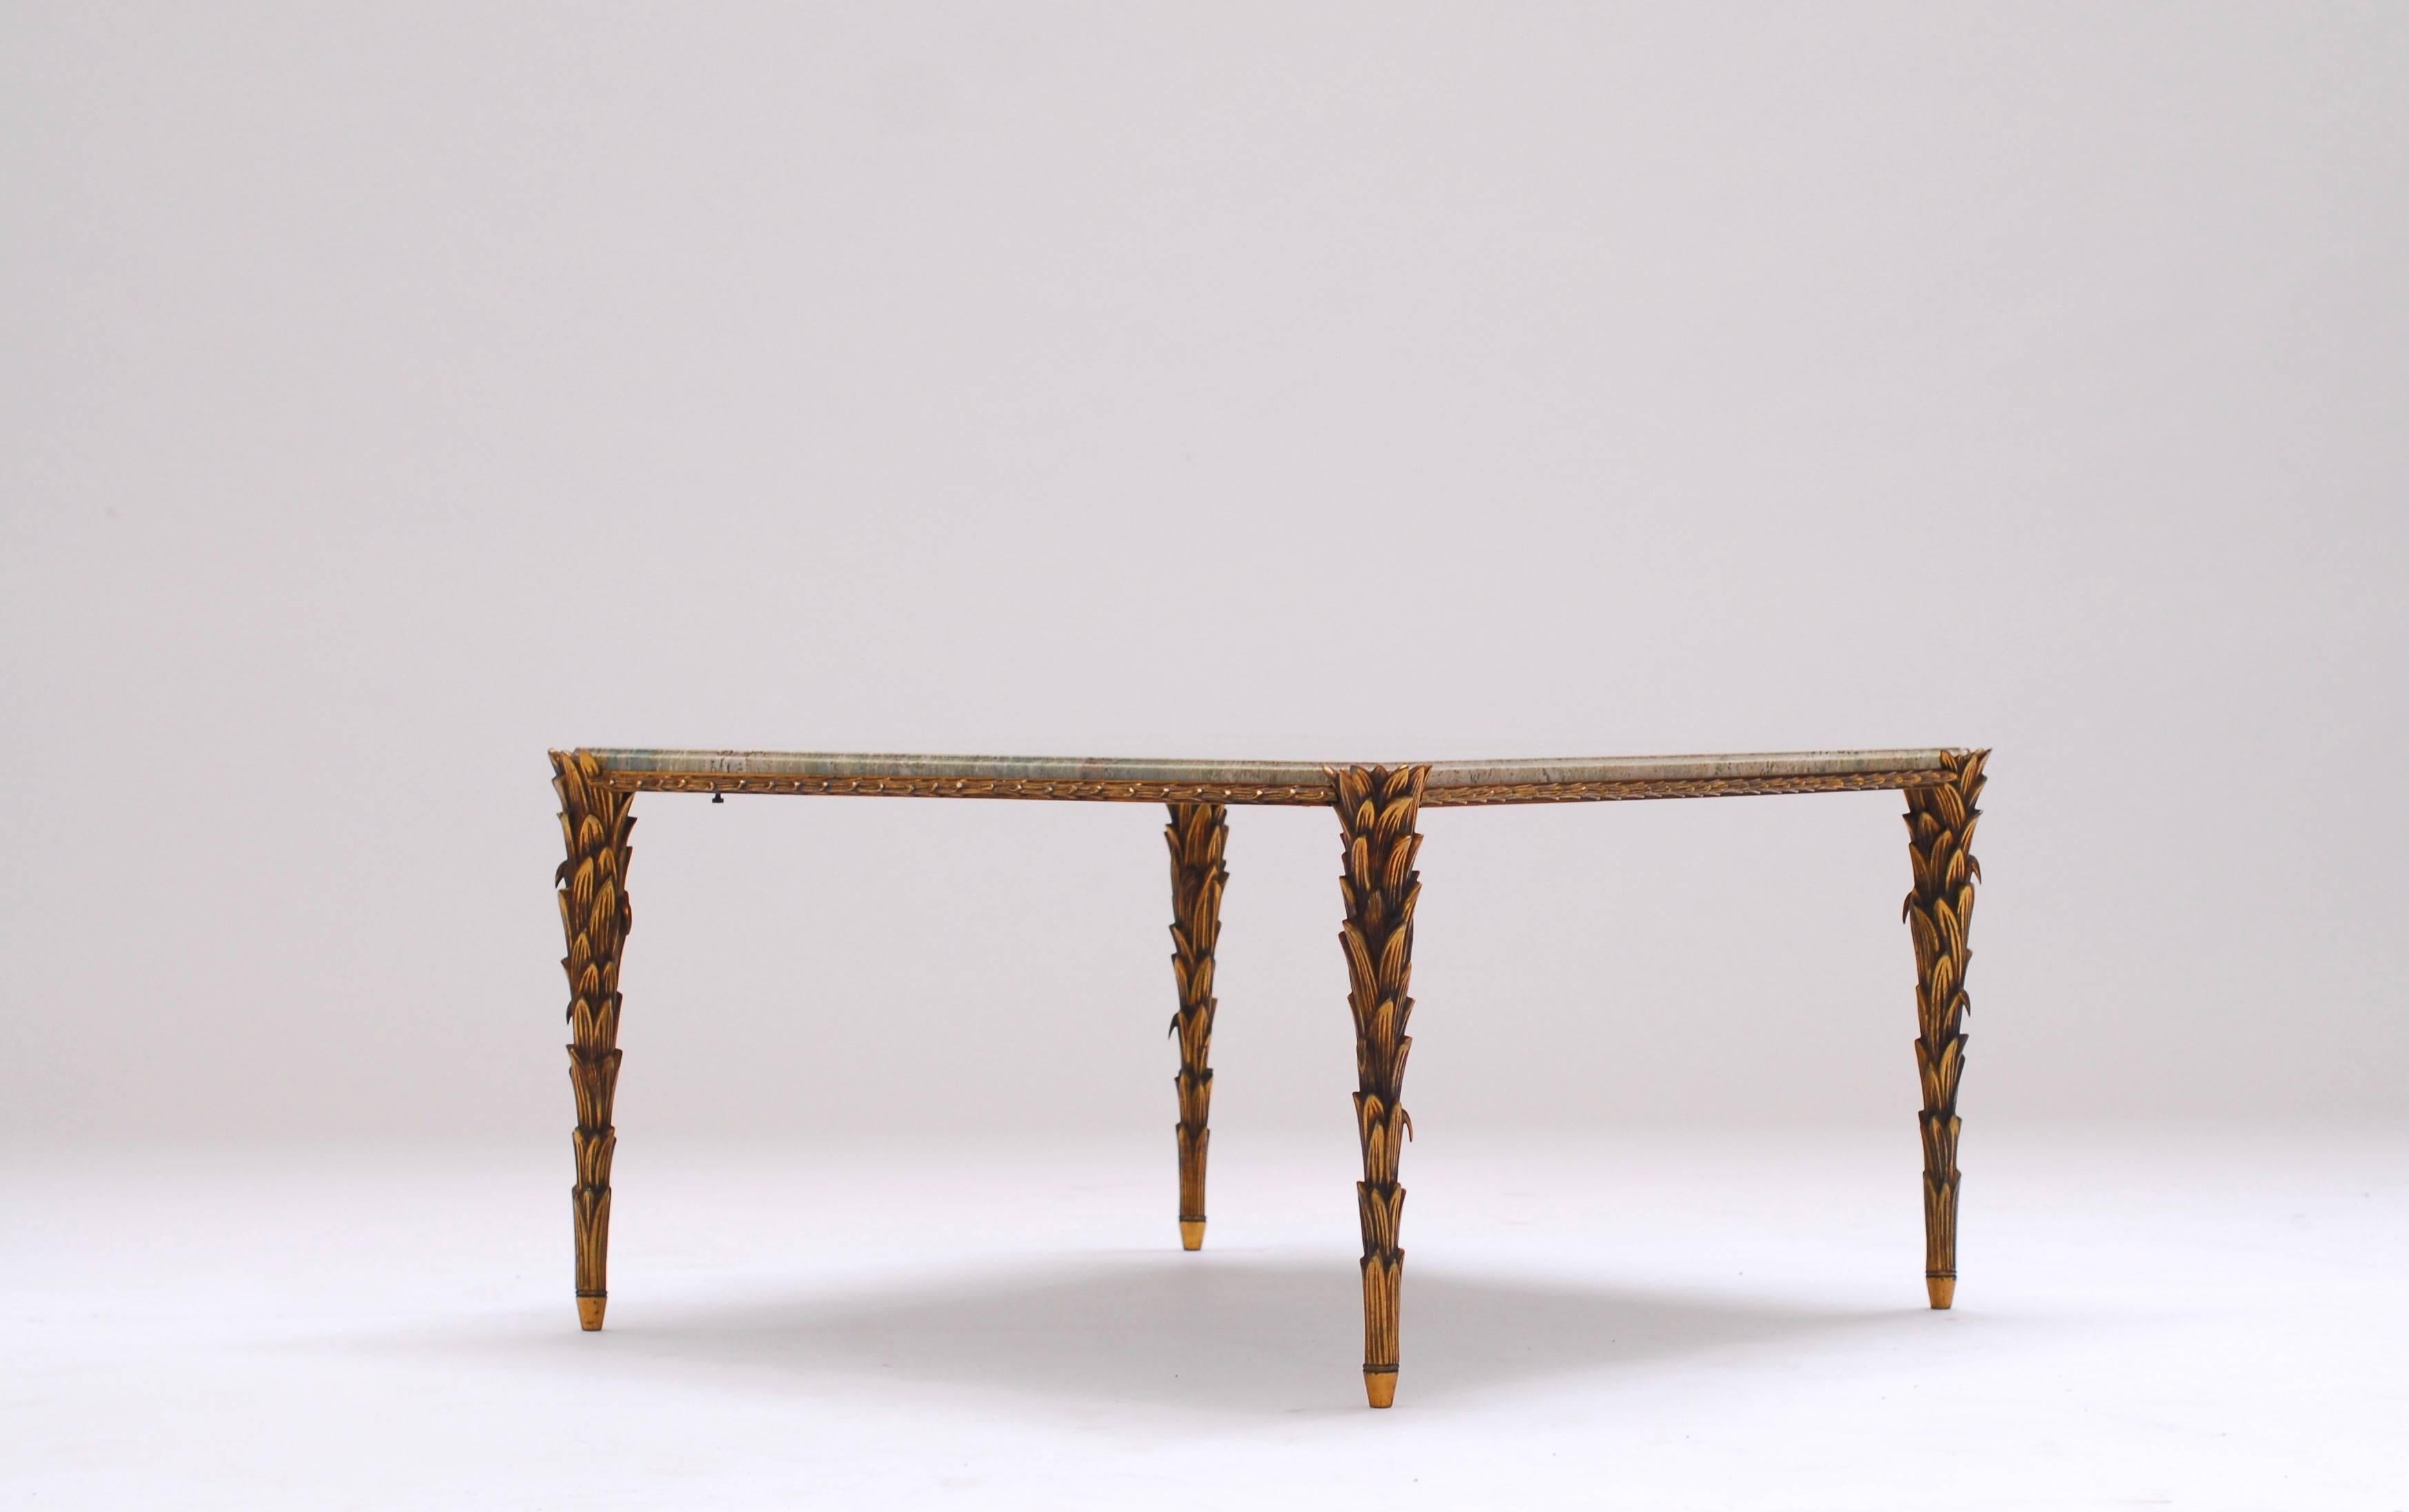 Stunningly executed bronze table by Maison Baguès. The highly articulated legs and the pistachio colored marble top makes it an elegant and yet strong piece.
Beneath the marble top the name of the family who ordered the table is marked handwritten.